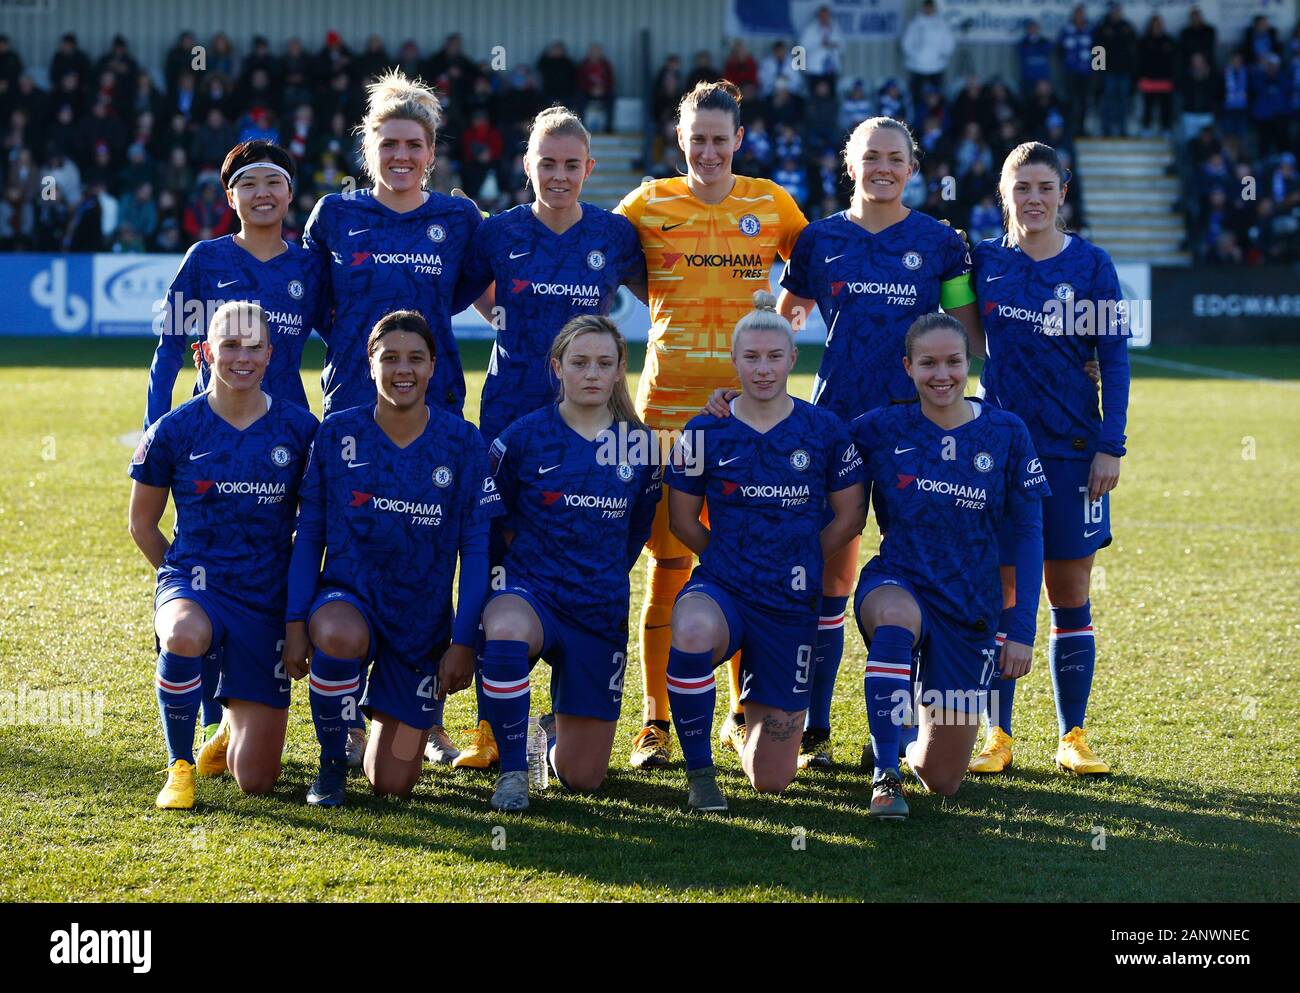 Chelsea Team Shootduring Barclays Women's Super League match between Arsenal Women and Chelsea Women at Meadow Park Stadium on January 19, 2020 in Borehamwood, England (Photo by AFS/Espa-Images) Stock Photo